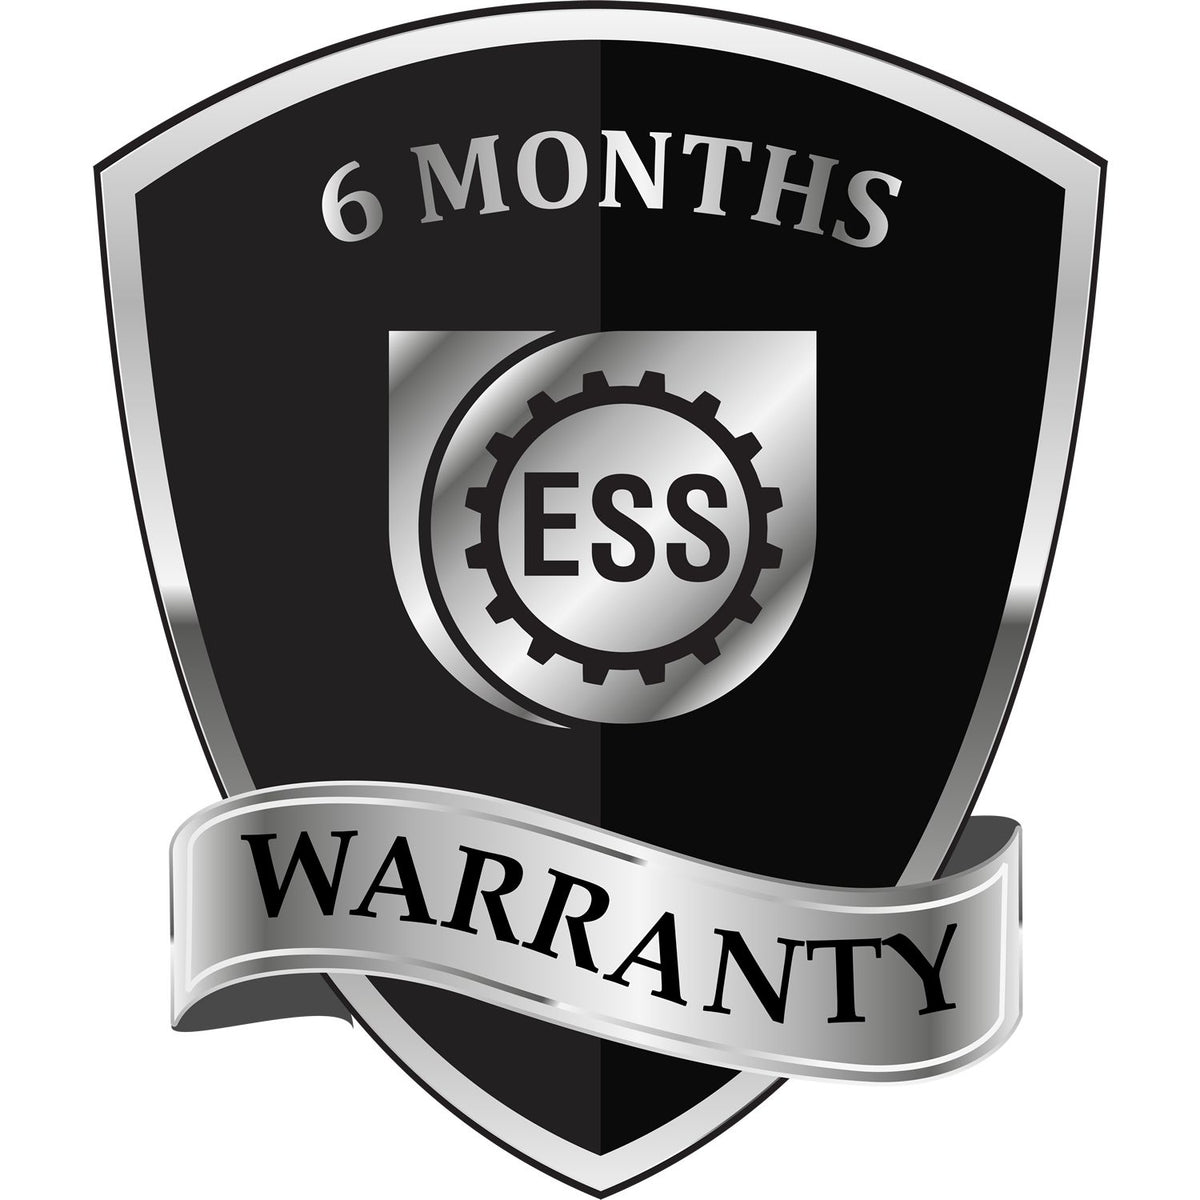 A badge or emblem showing a warranty icon for the Slim Pre-Inked Minnesota Professional Engineer Seal Stamp